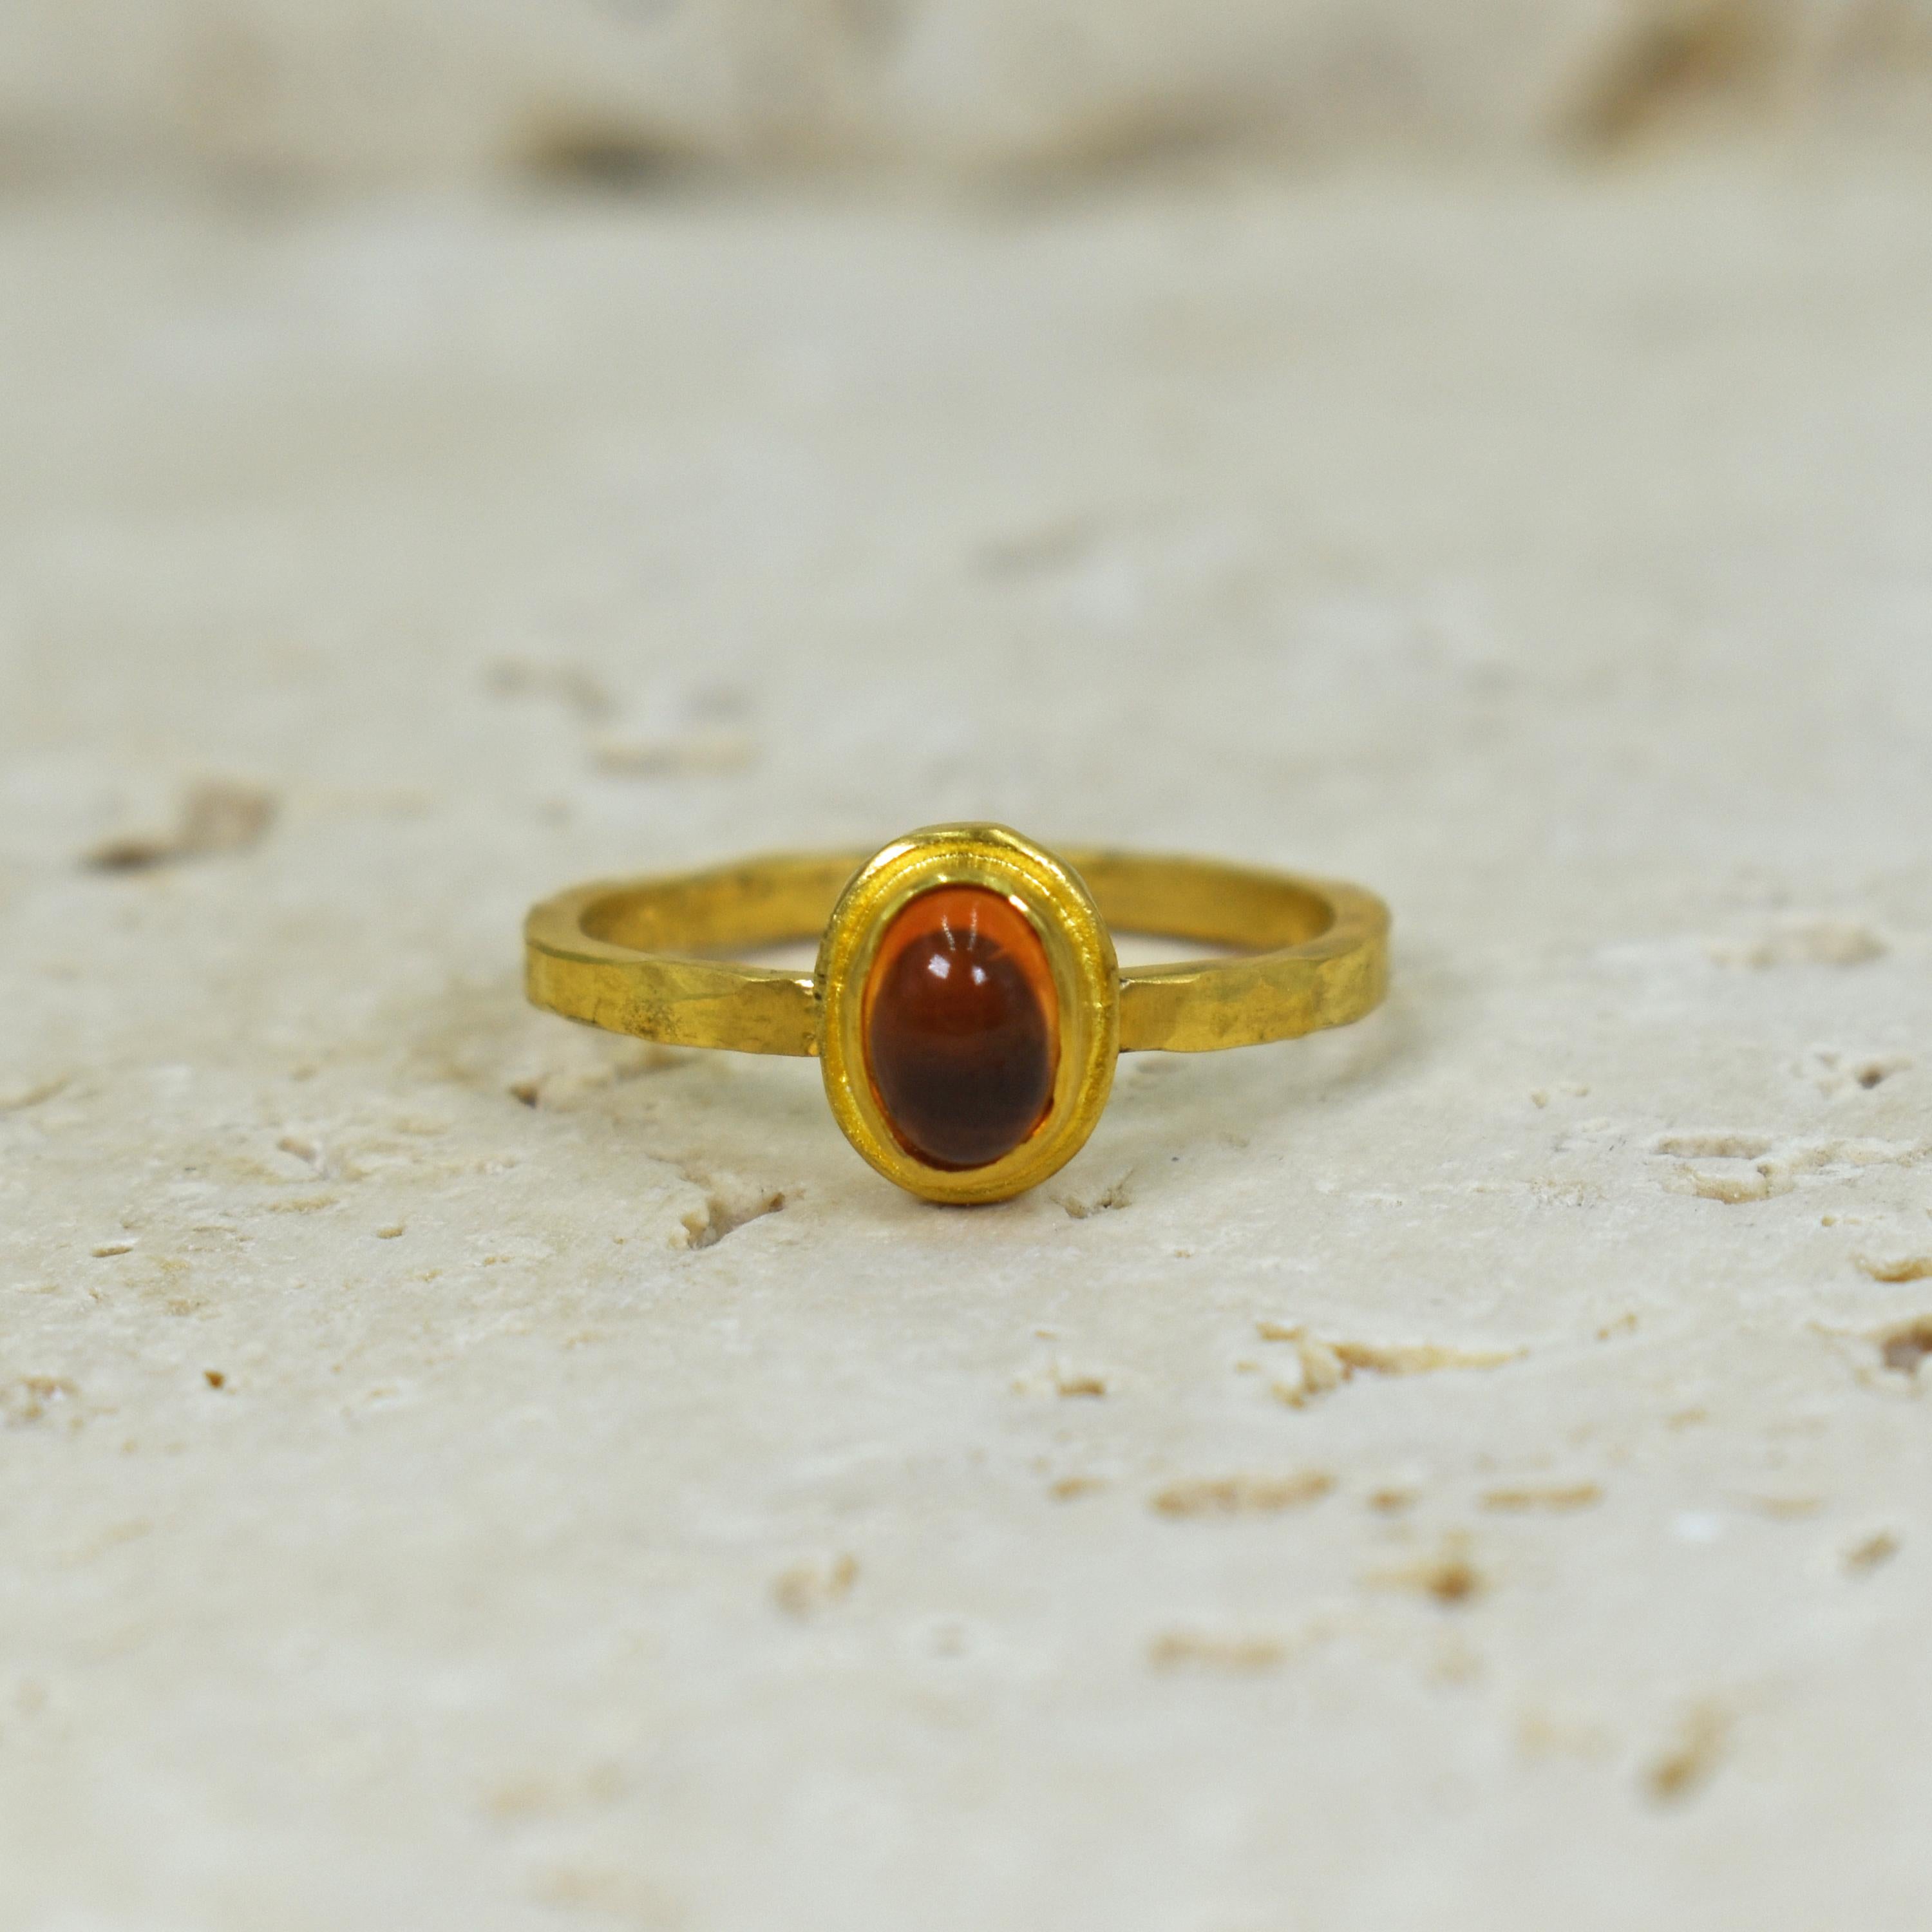 Mandarin Spessartite Garnet one carat cabochon set in a textured, hand forged 22k yellow gold solitaire ring. The warm orange Garnet and hammered high karat gold fuses contemporary, minimalist elegance with old world charm. Wear this ring on its own